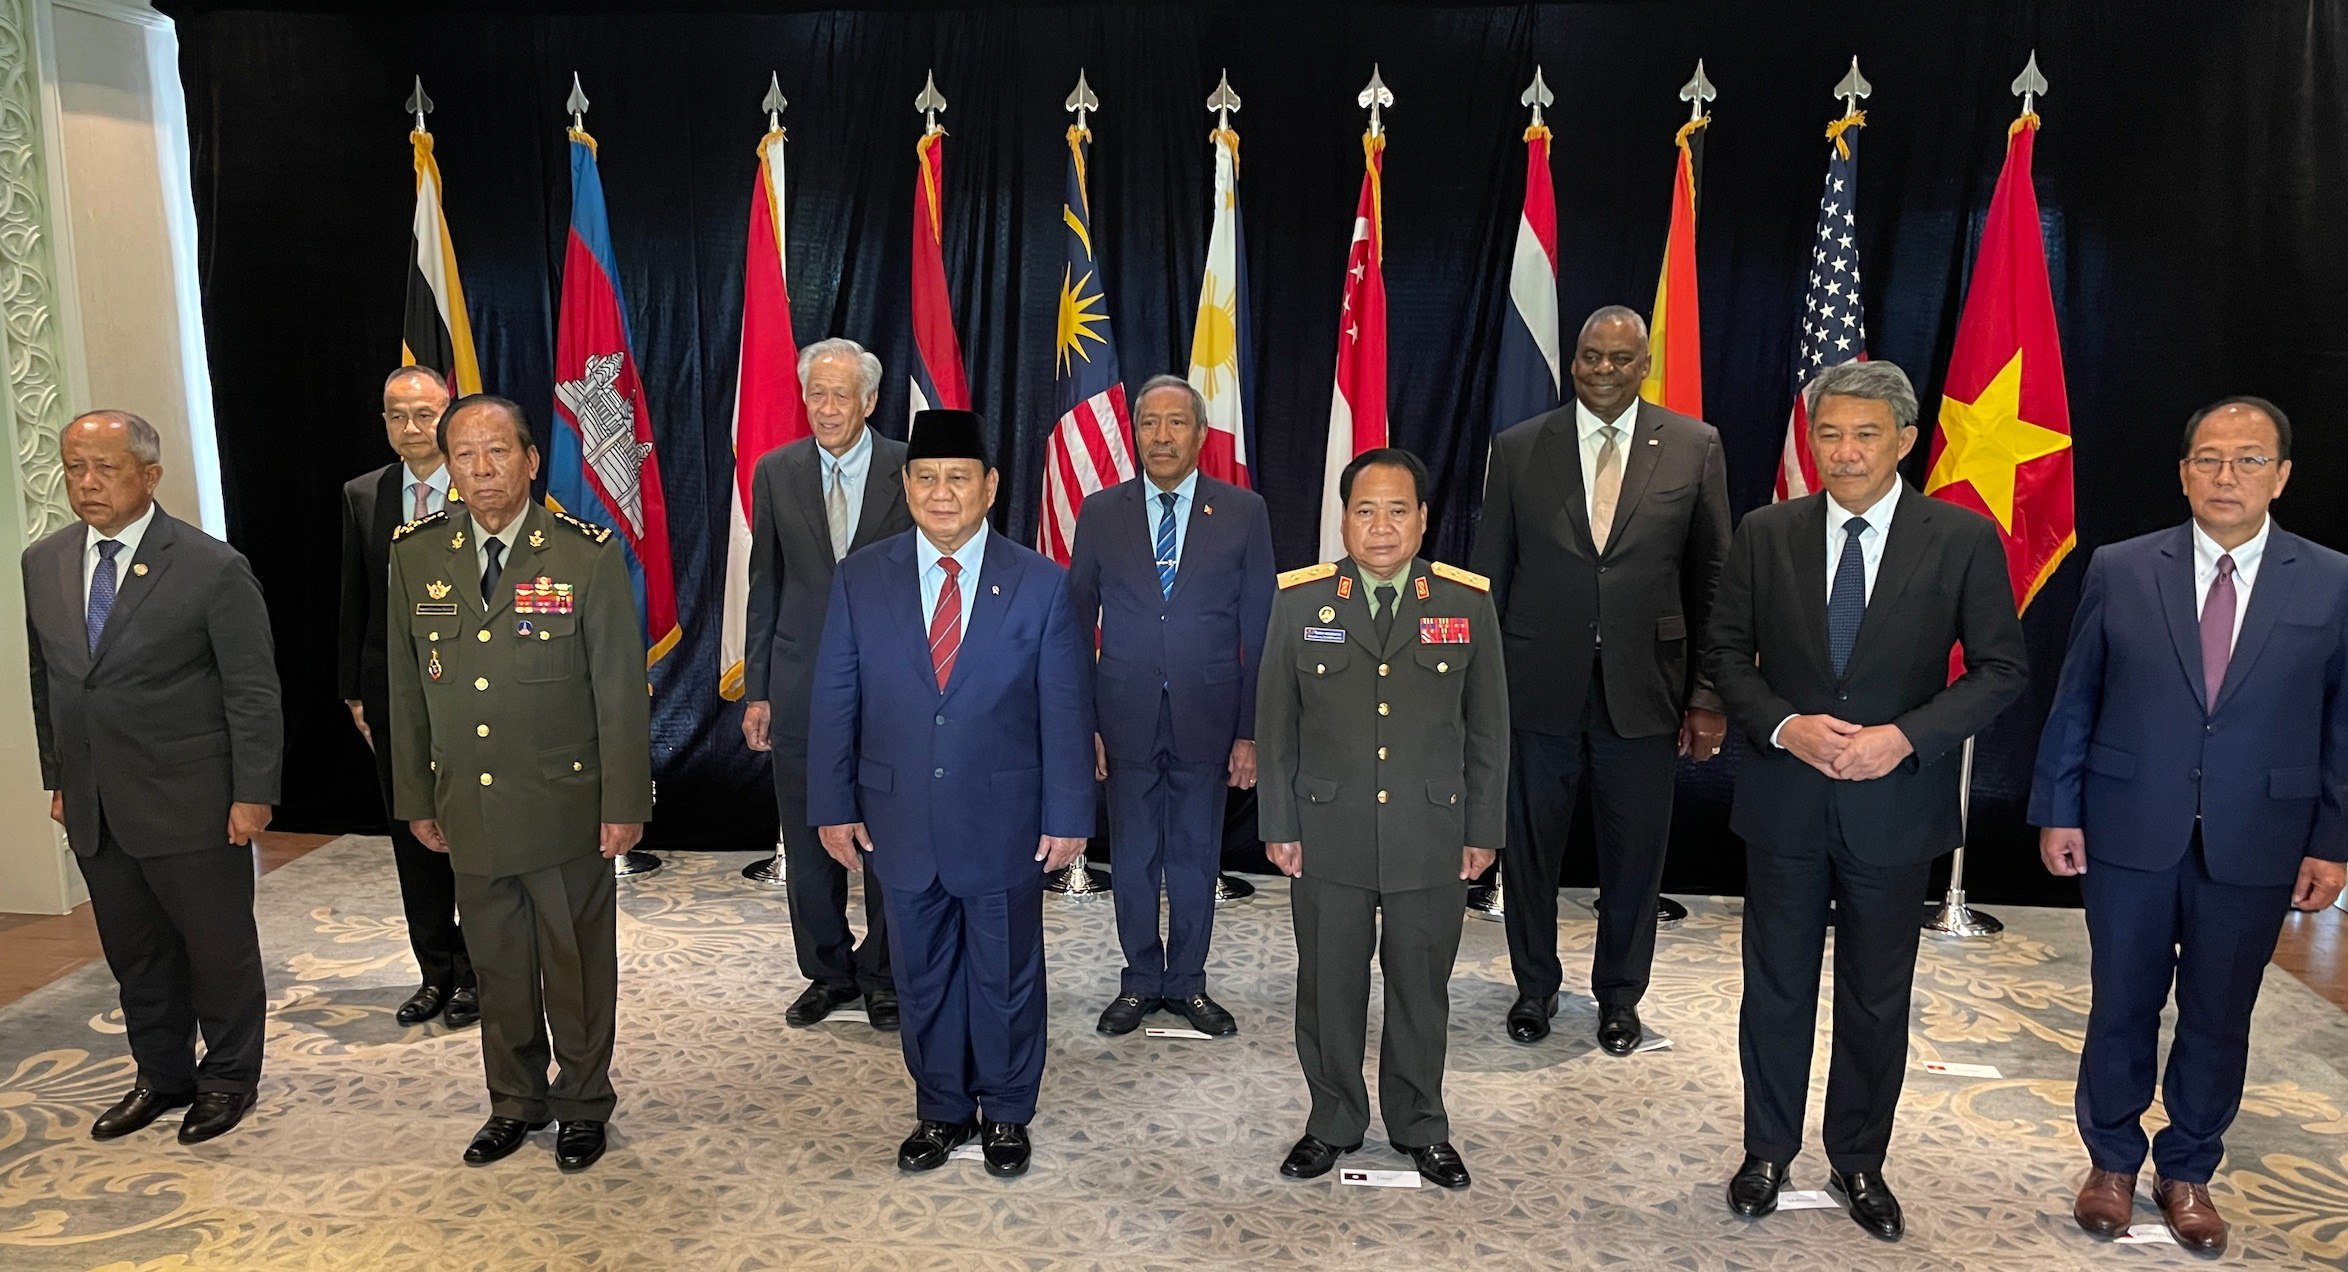 Pentagon chief Lloyd Austin with Southeast Asian defence ministers at the Shangri-La Dialogue security forum in Singapore. Photo: EPA-EFE/Singapore Mindef